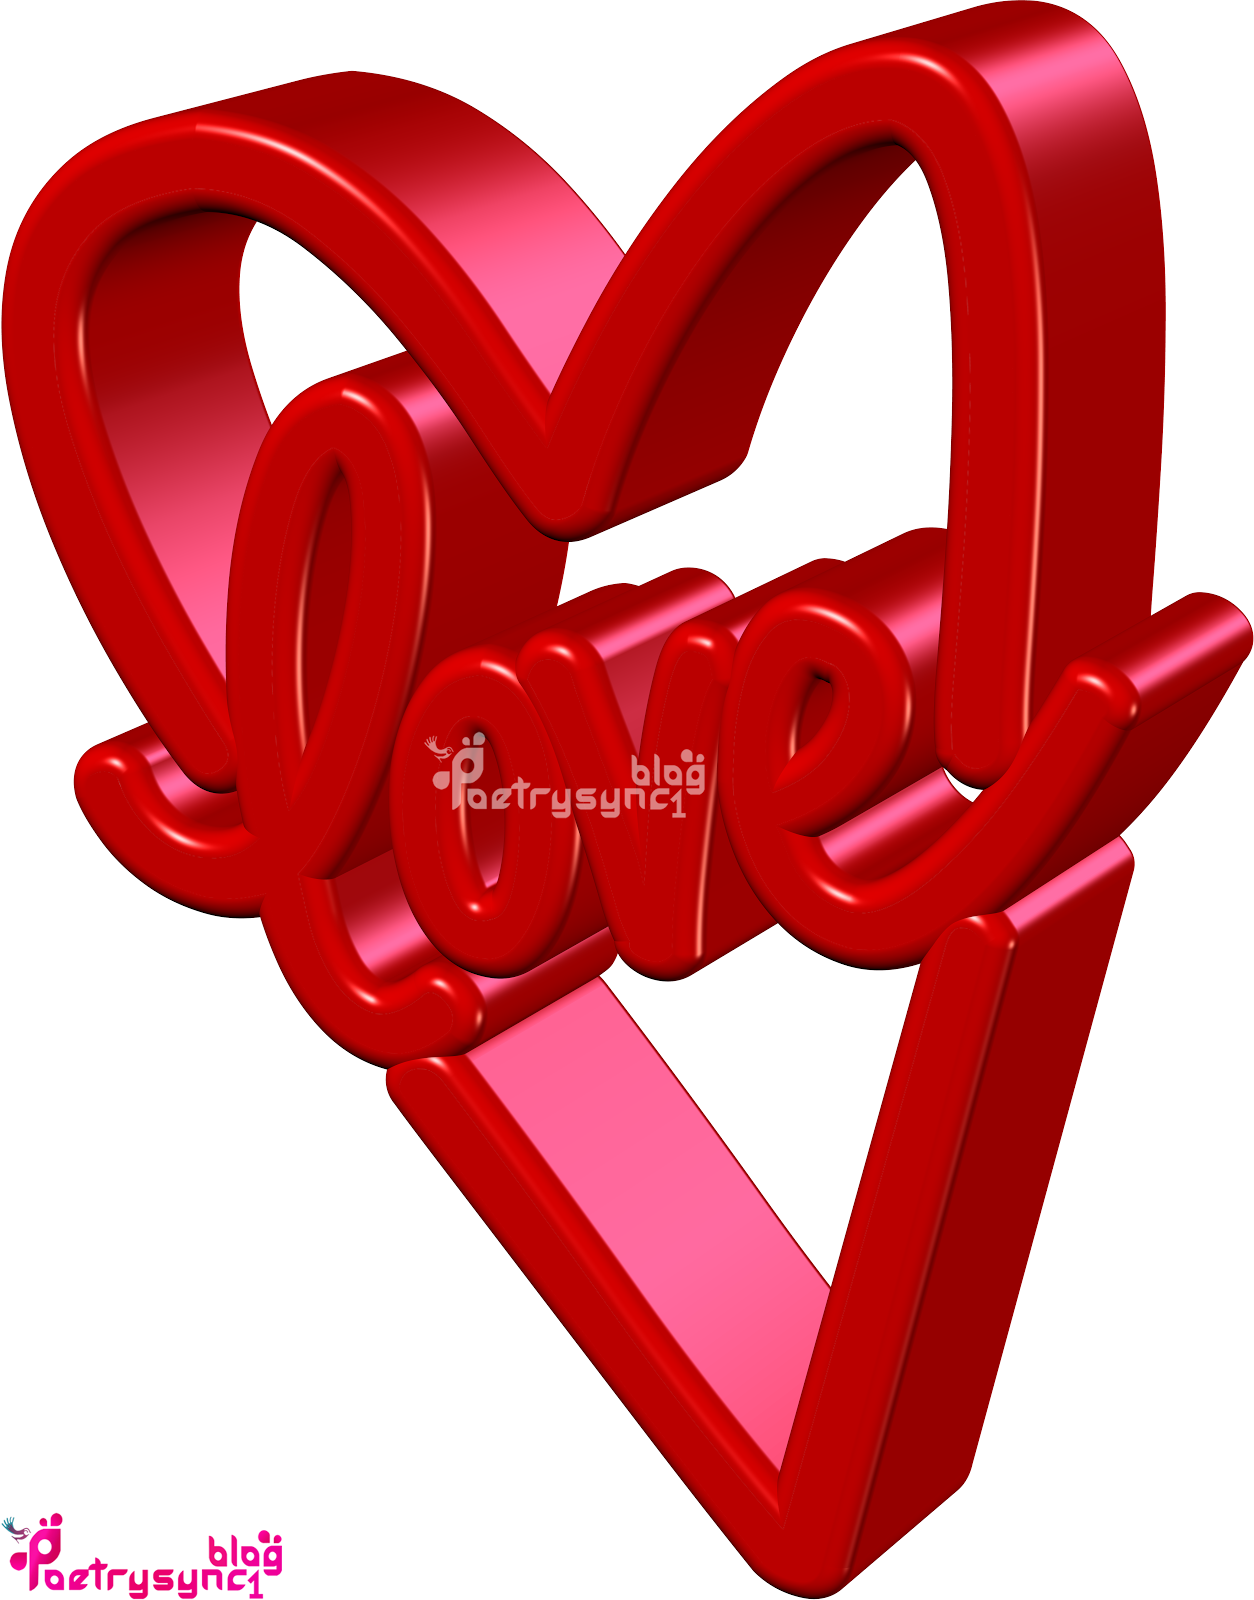 Love 3D Wallpapers Heart Images With Wishes Messages In English.